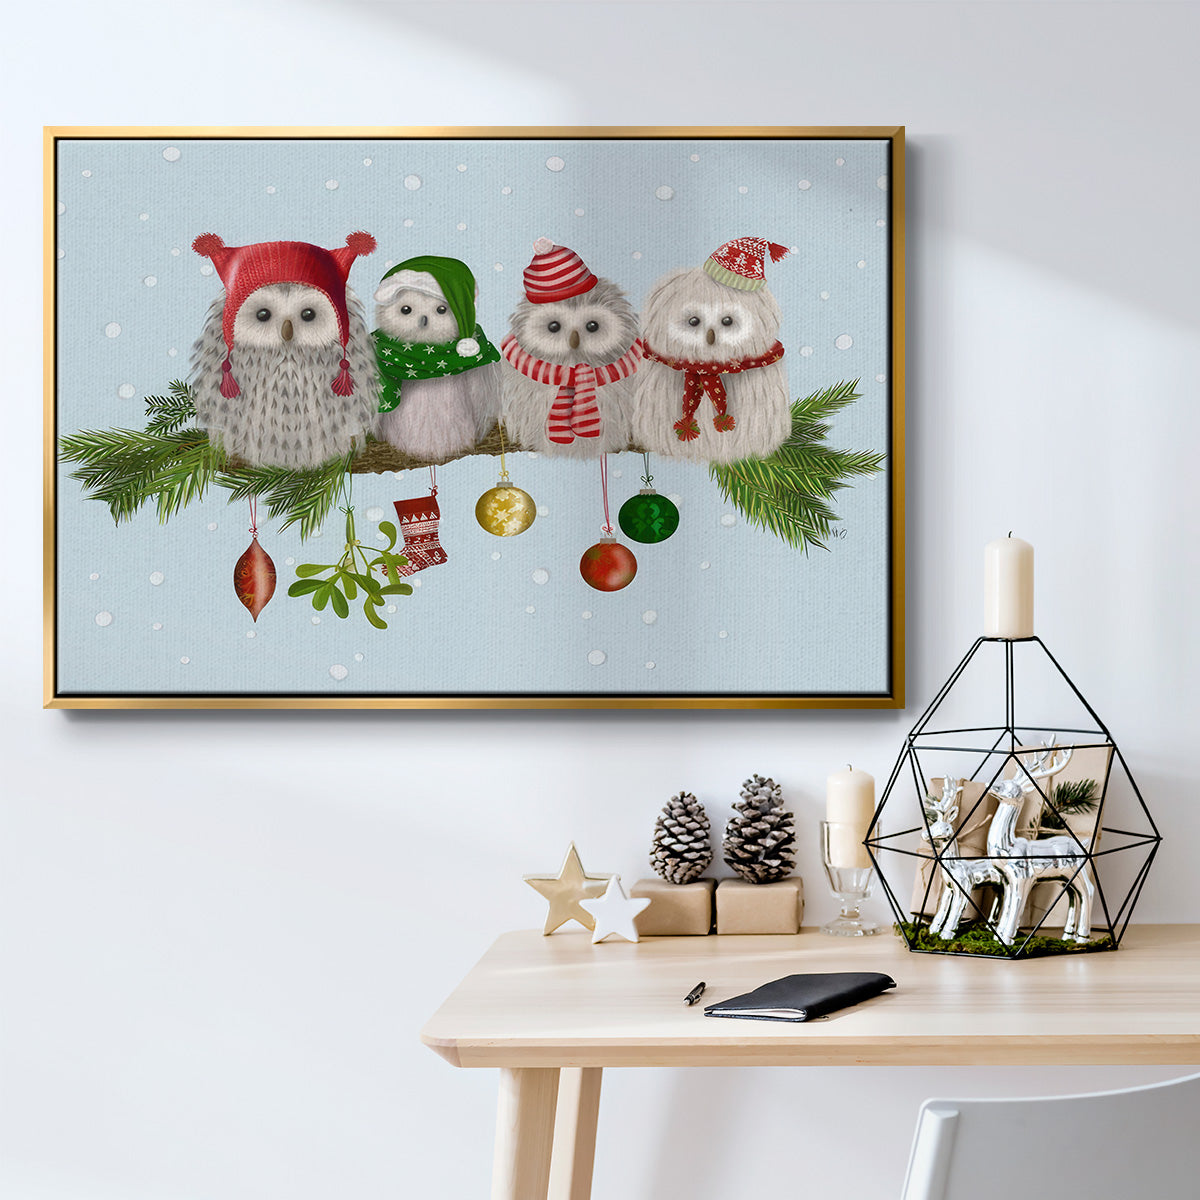 Christmas Fluffy Christmas Owls on Branch - Framed Gallery Wrapped Canvas in Floating Frame